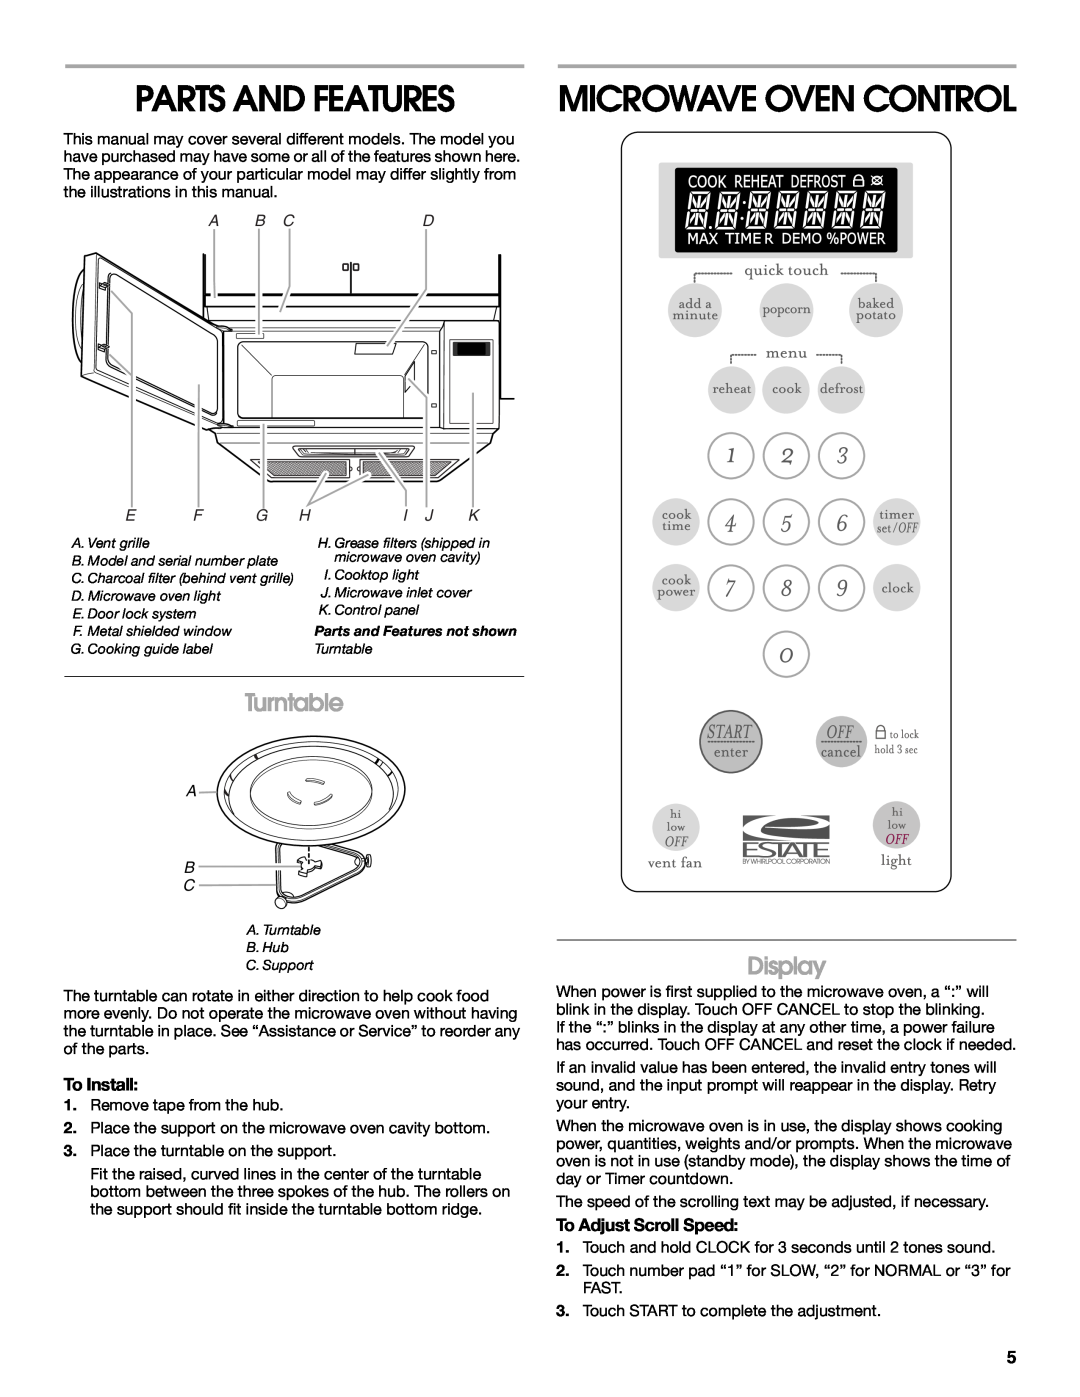 Whirlpool TMH16XS manual Parts And Features, Turntable, Display, To Install, To Adjust Scroll Speed, A B C 